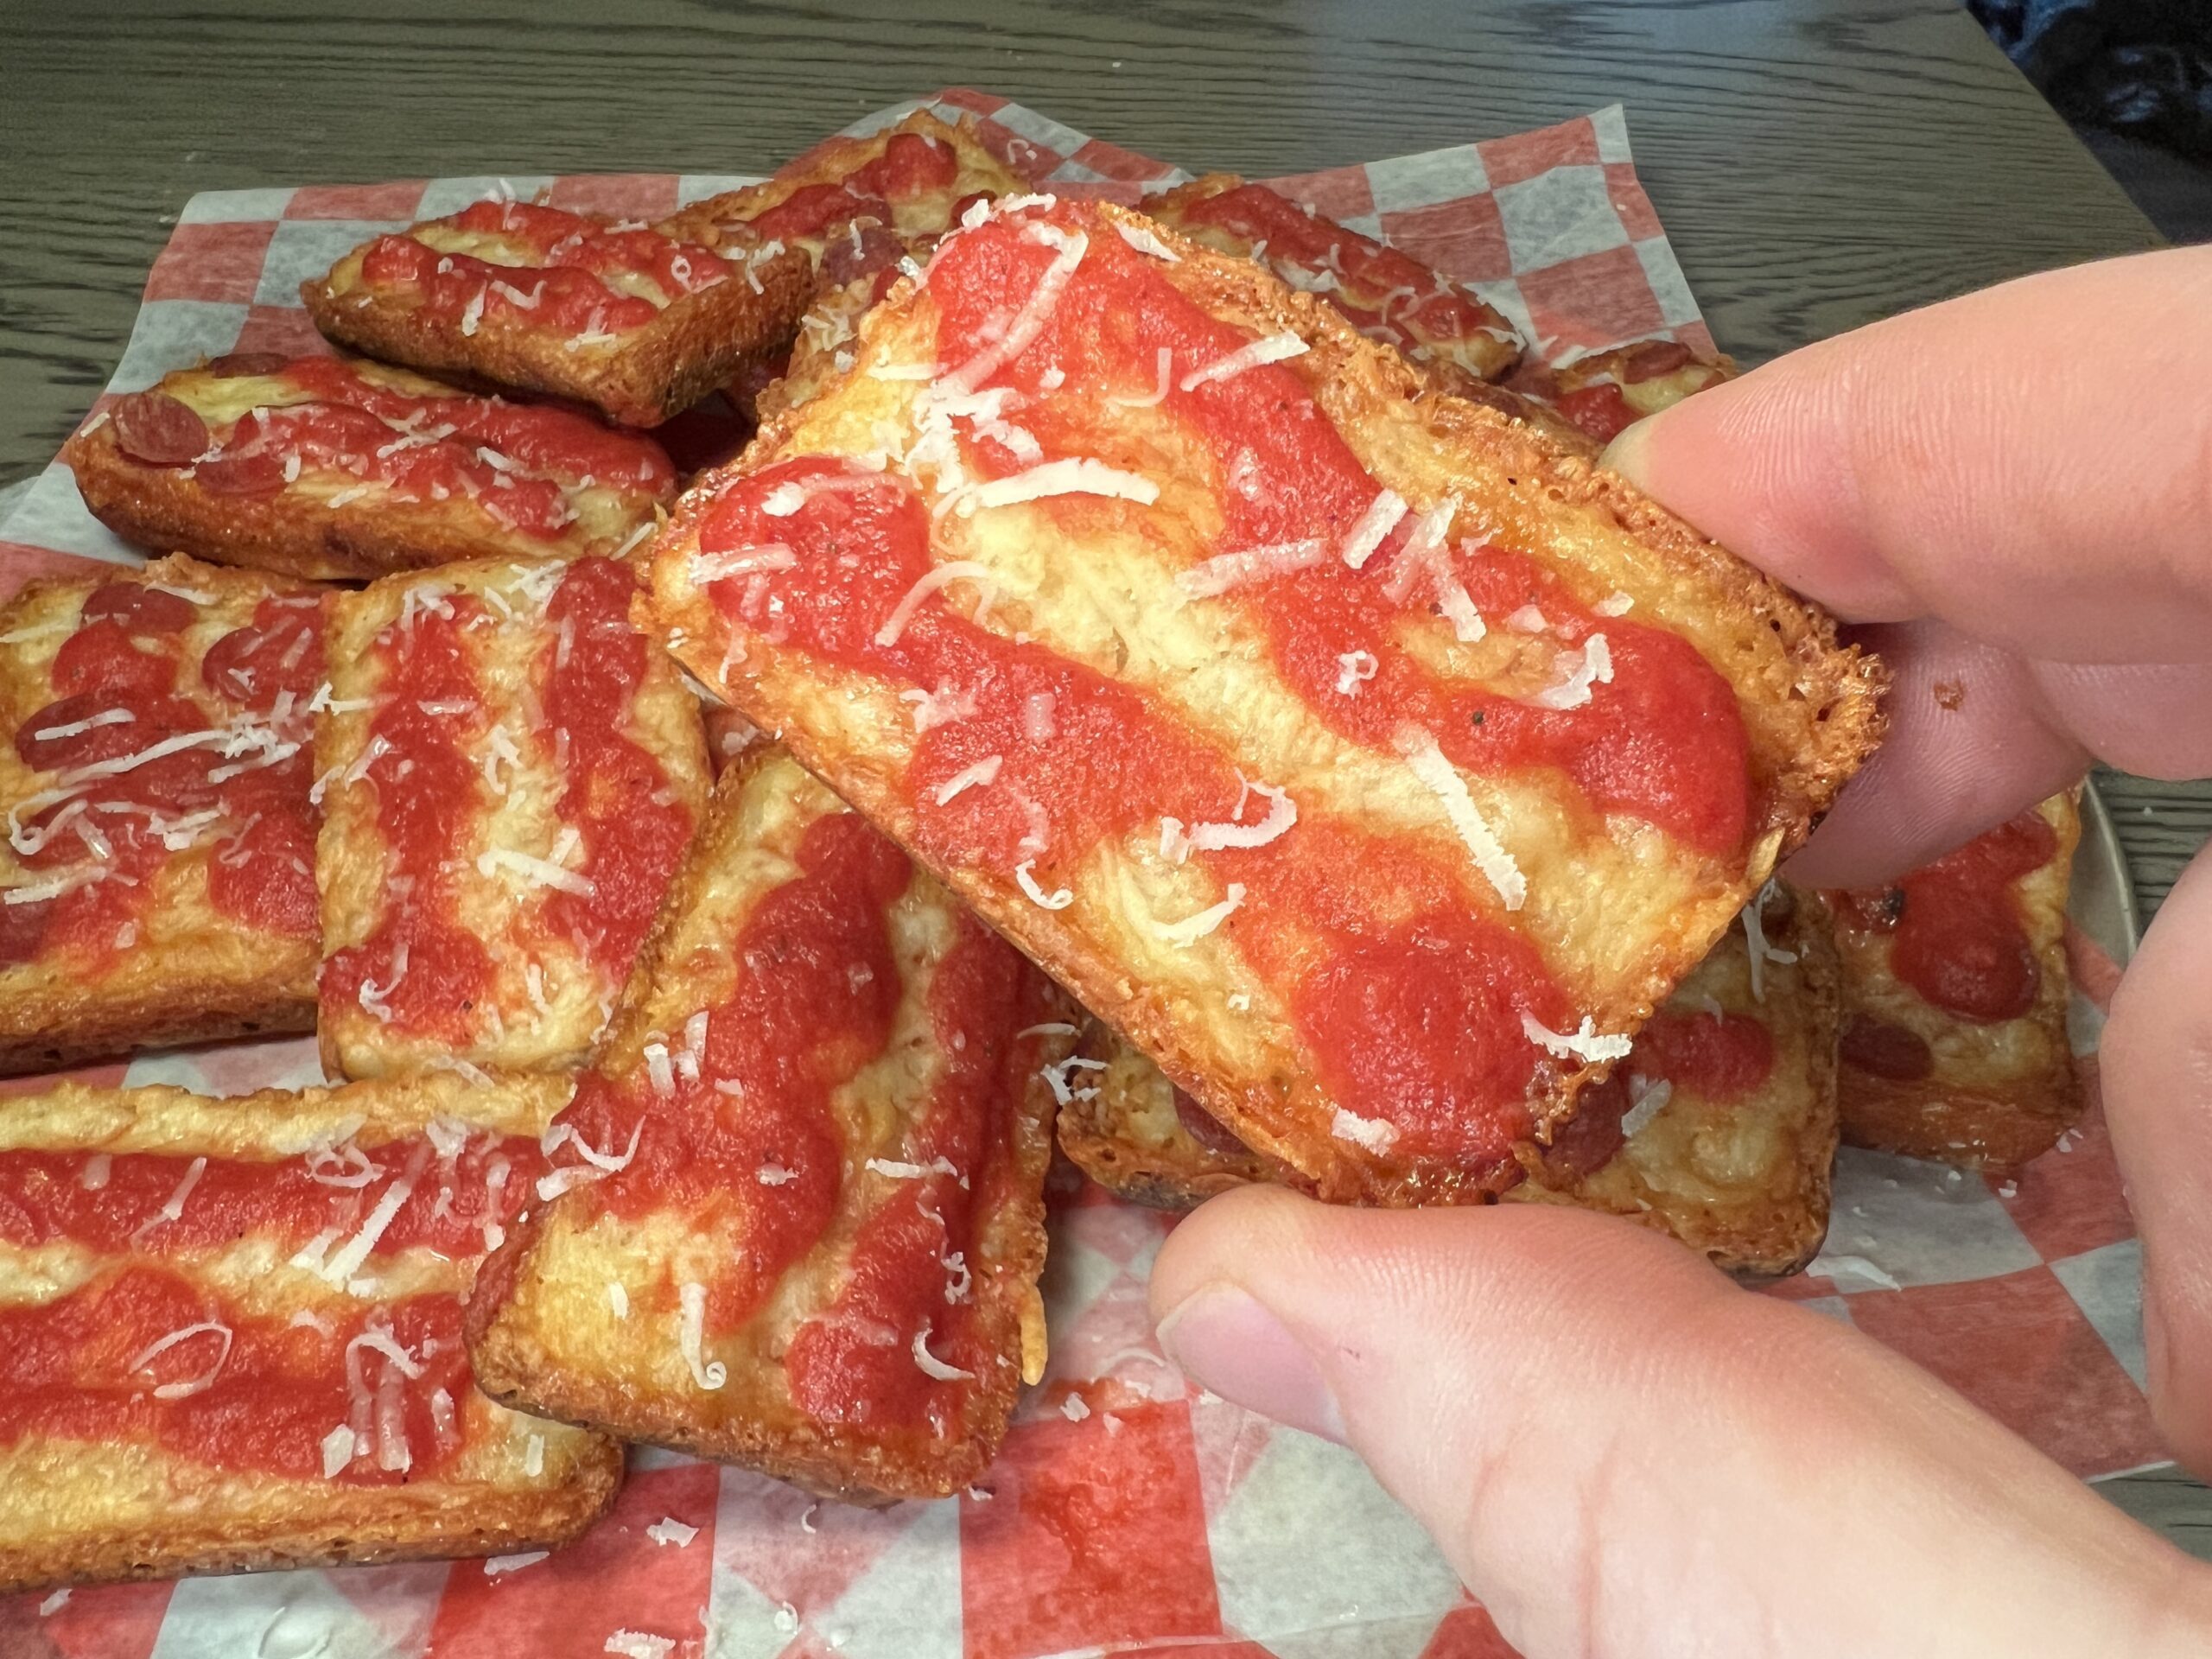 Review of Feel Good Foods' Gluten-Free Detroit-Style Pizza